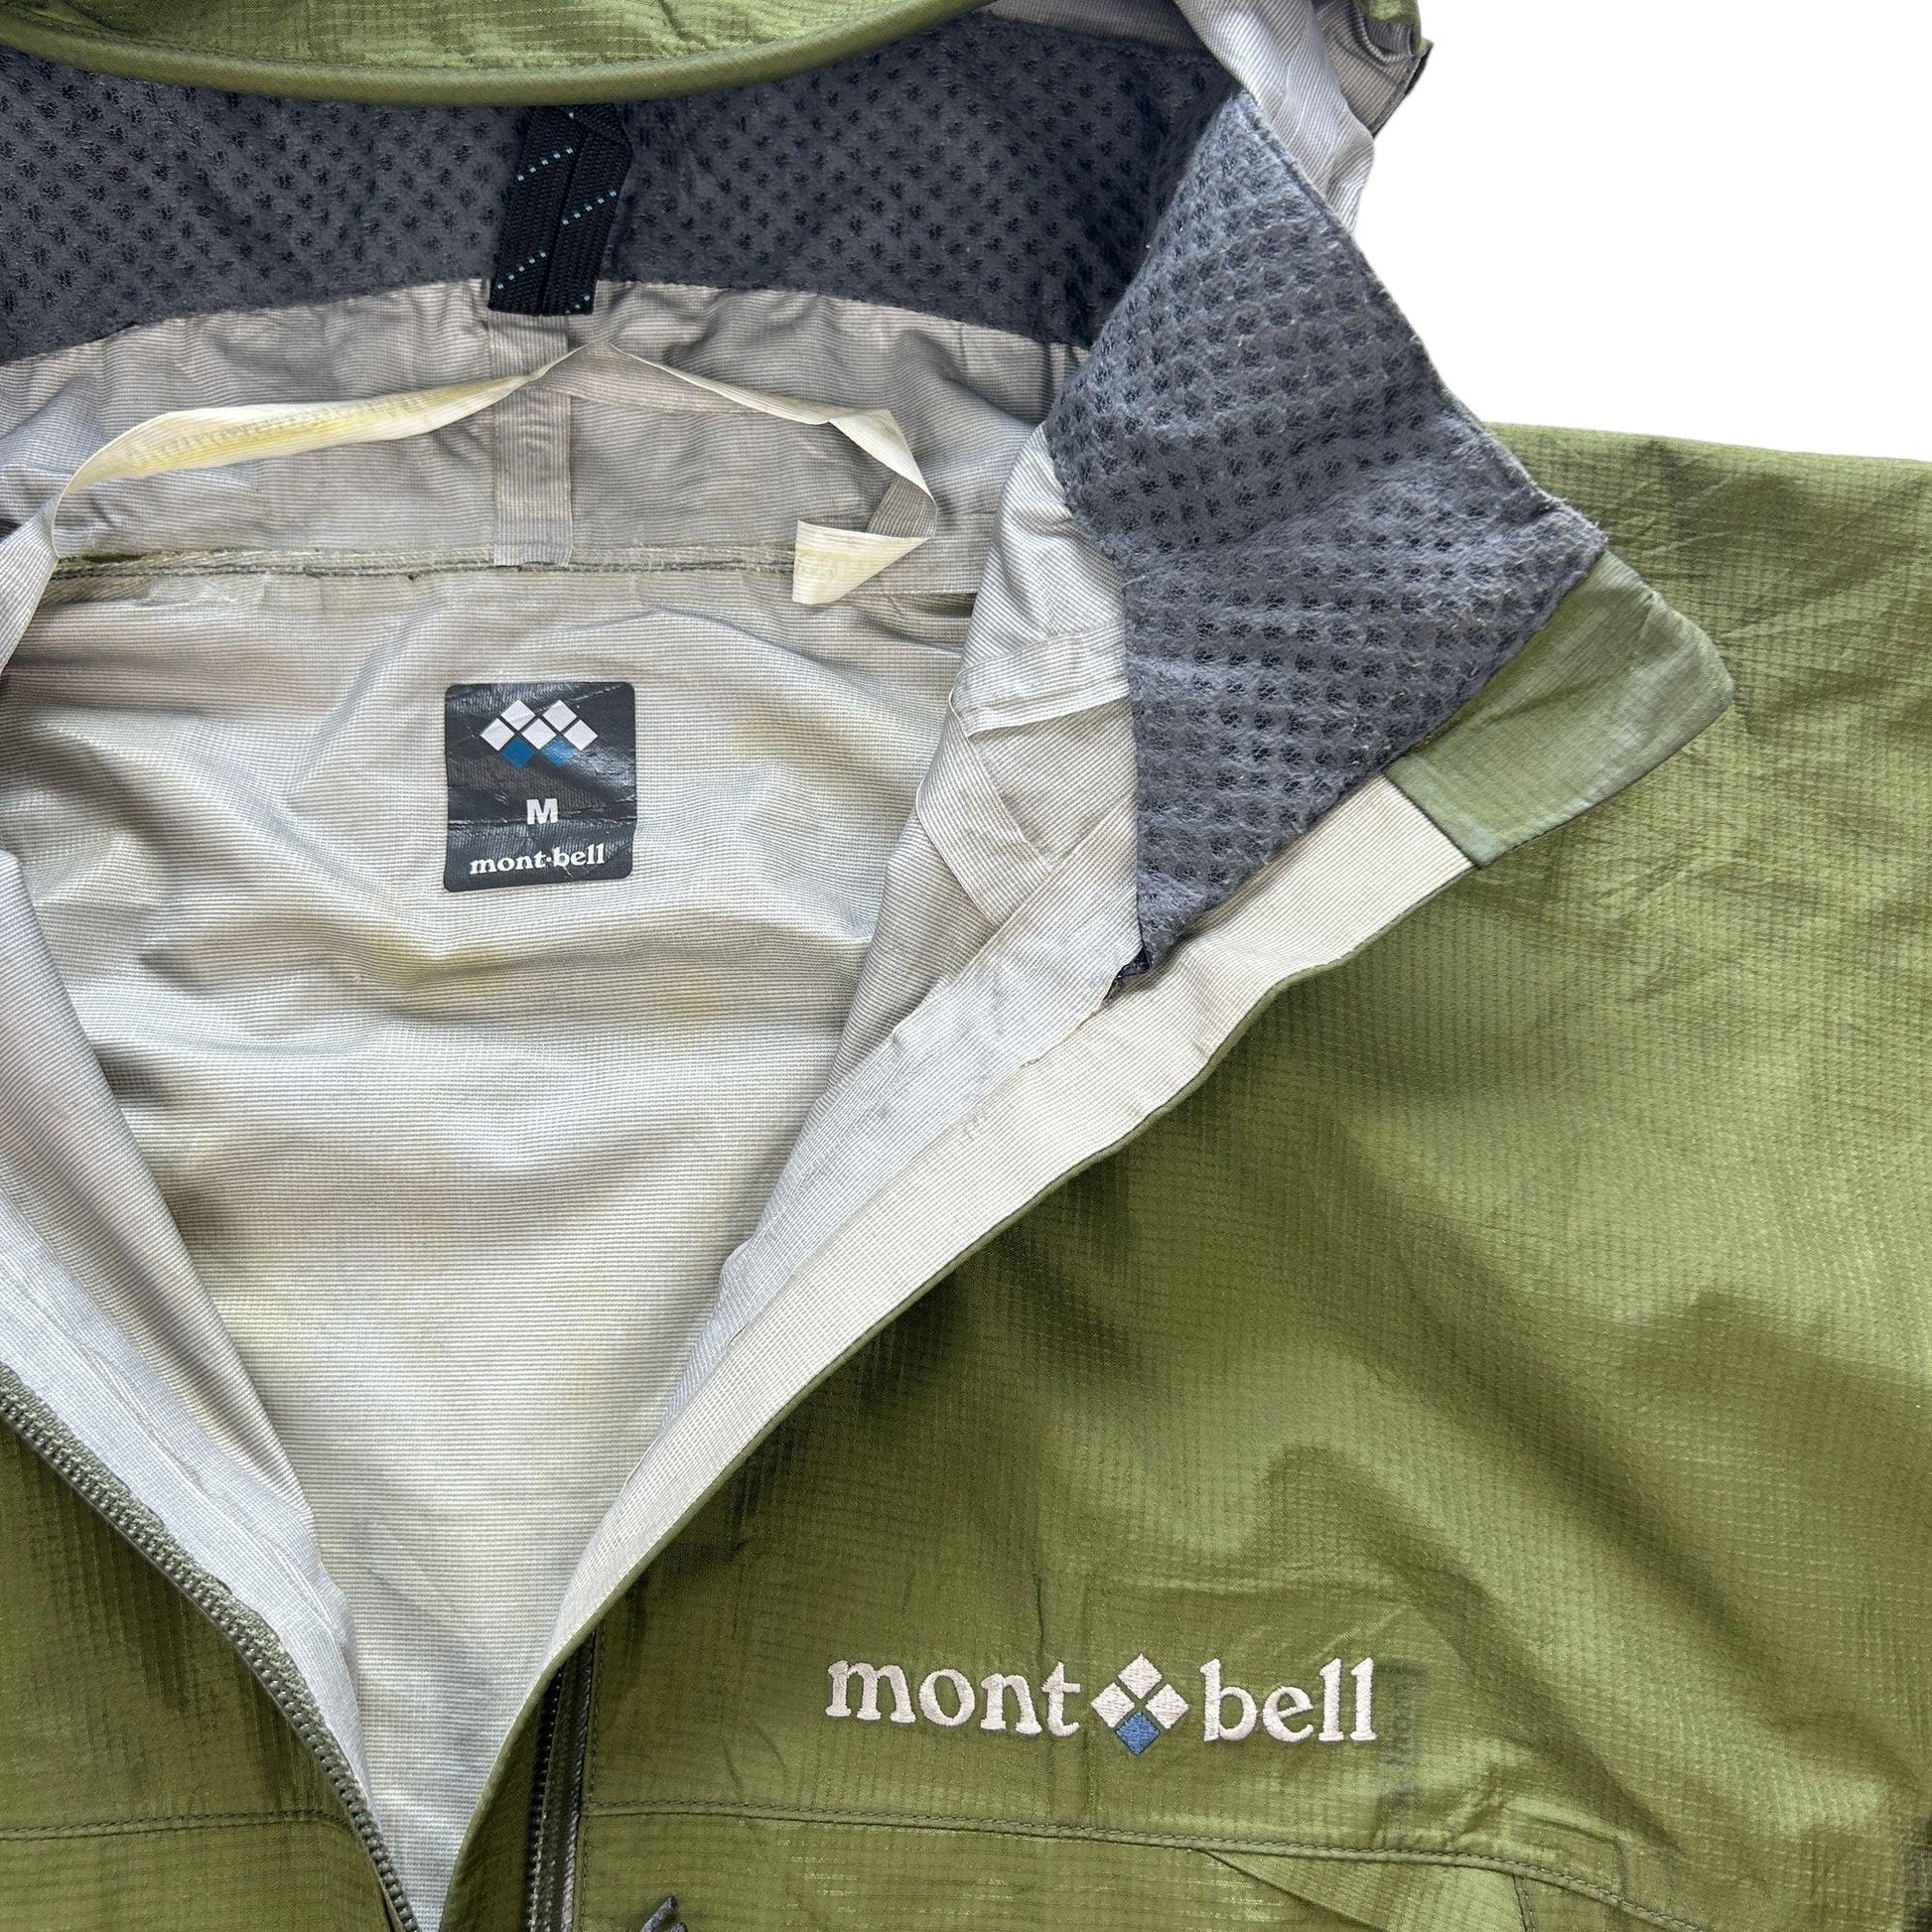 Vintage Montbell GORE-TEX Waterproof Jacket Size M - Known Source